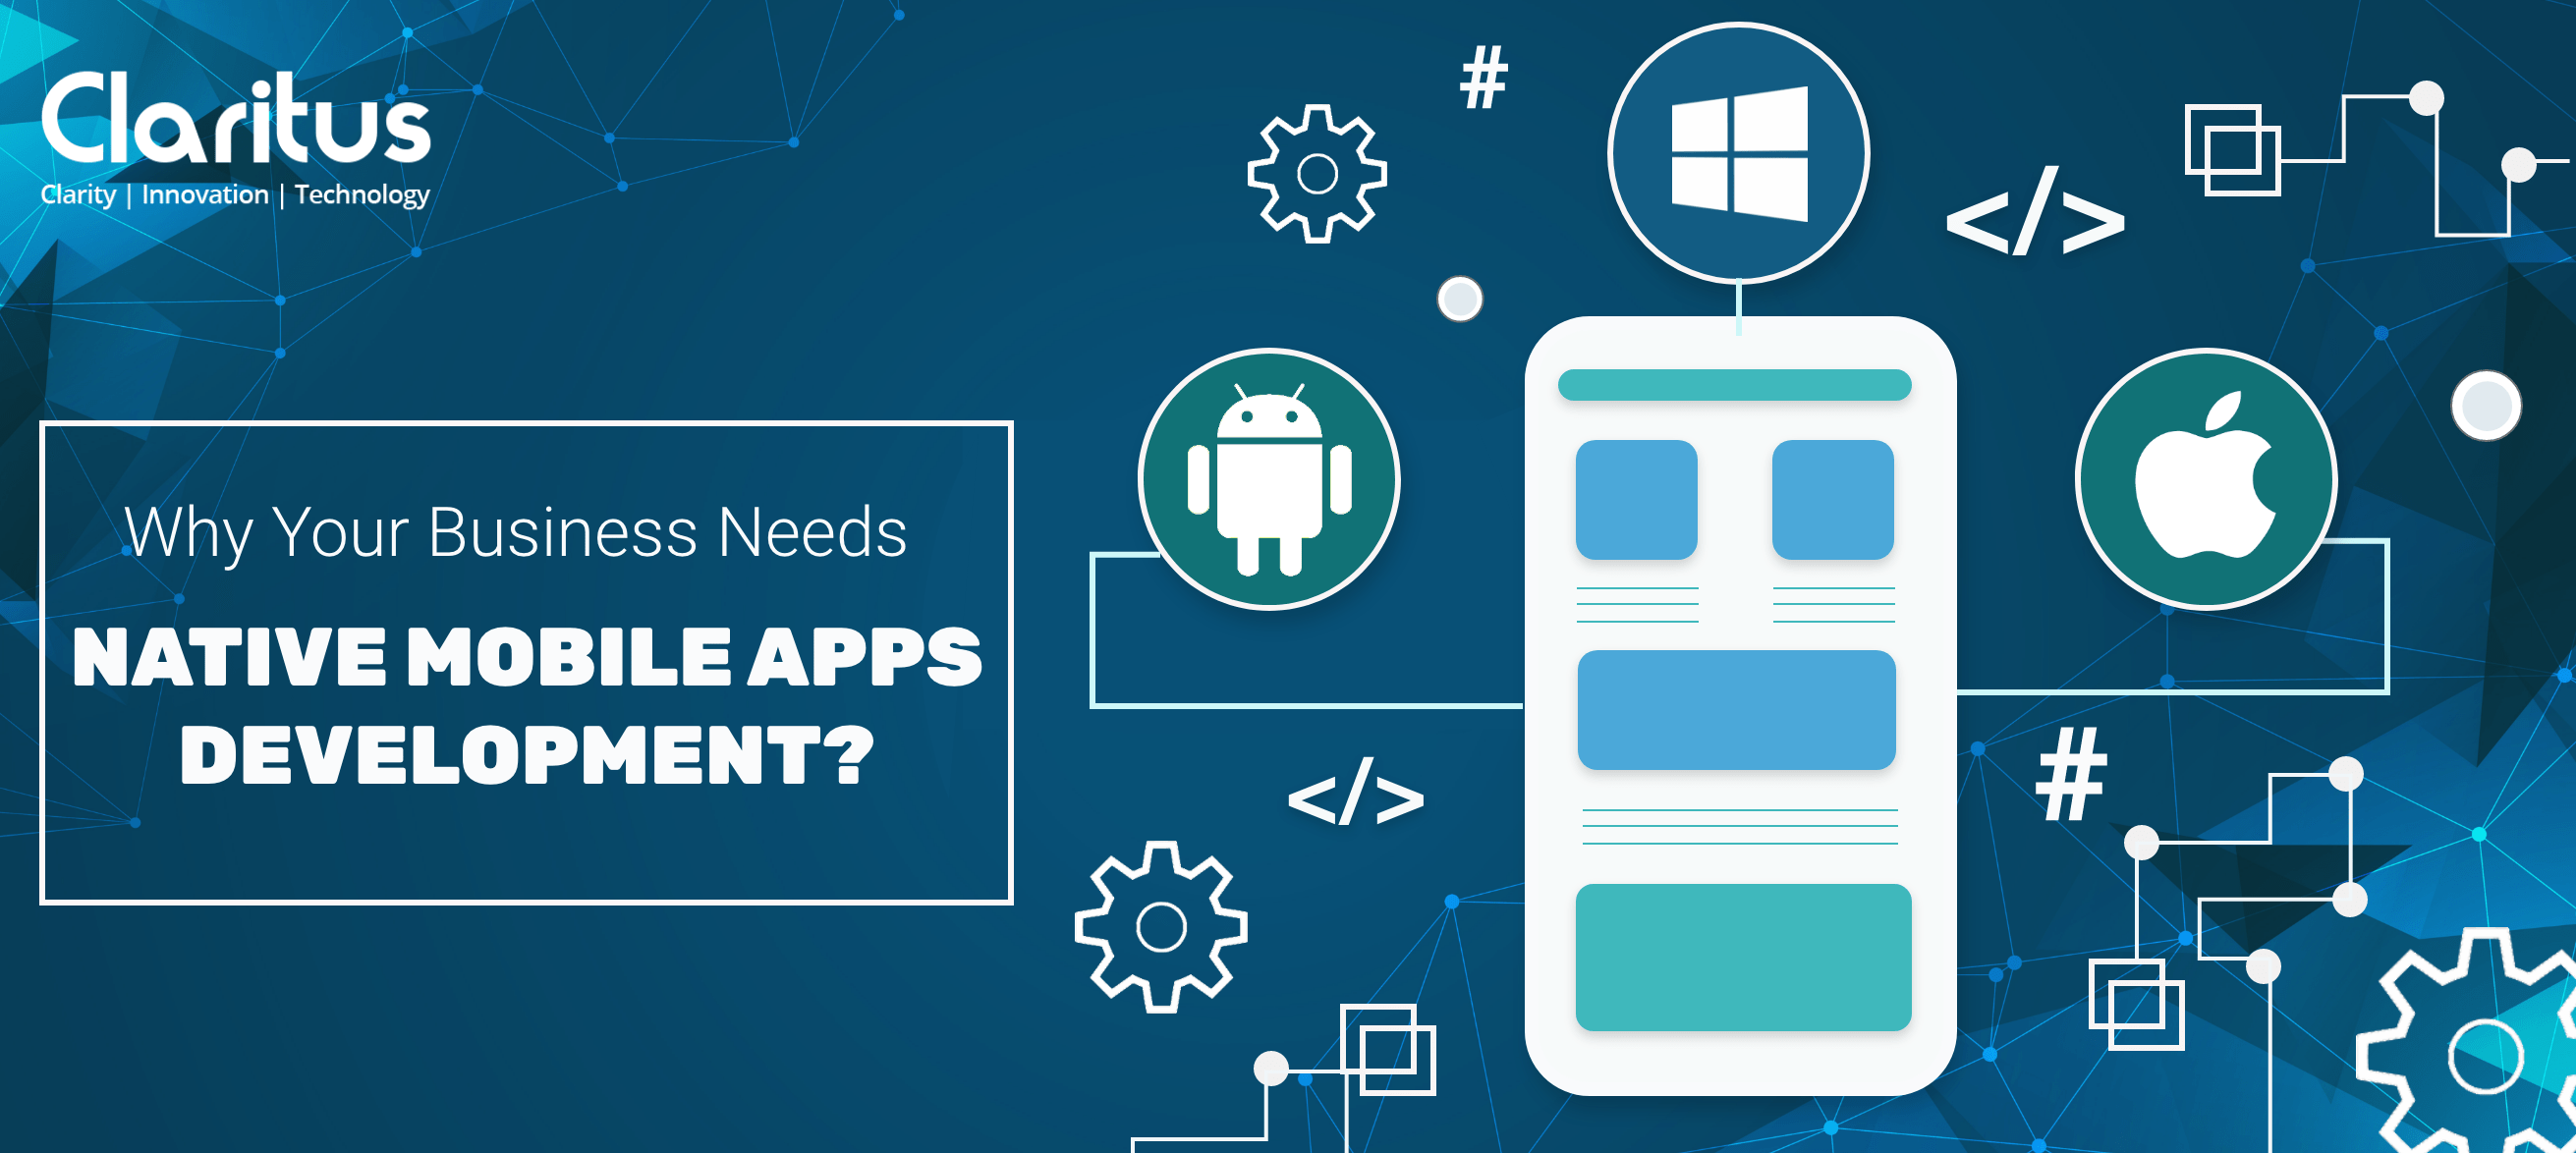 Why Your Business Needs Native Mobile Apps Development